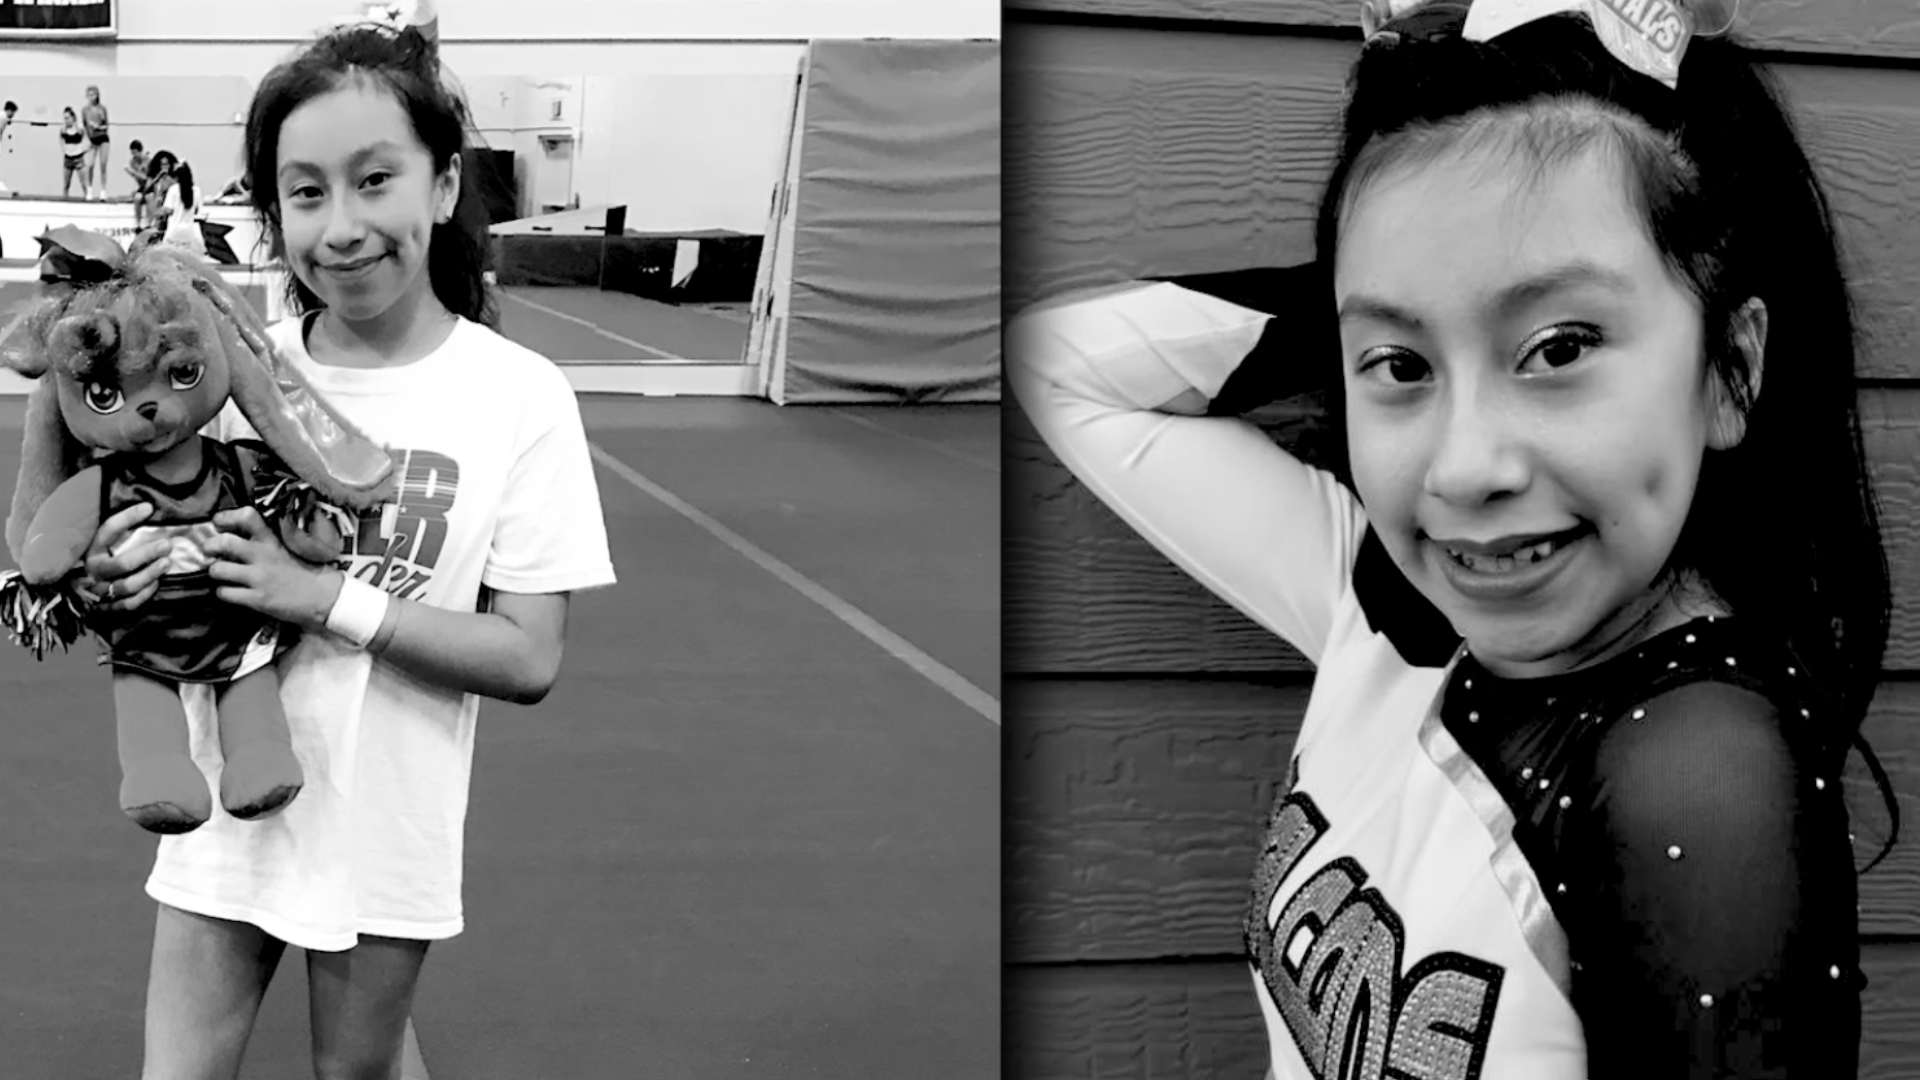 Linda "Michellita" Rogers, 12, was recording herself getting ready for a cheer competition when her house blew up. Her family wants her death to be a call to action for Atmos to fix its gas lines.